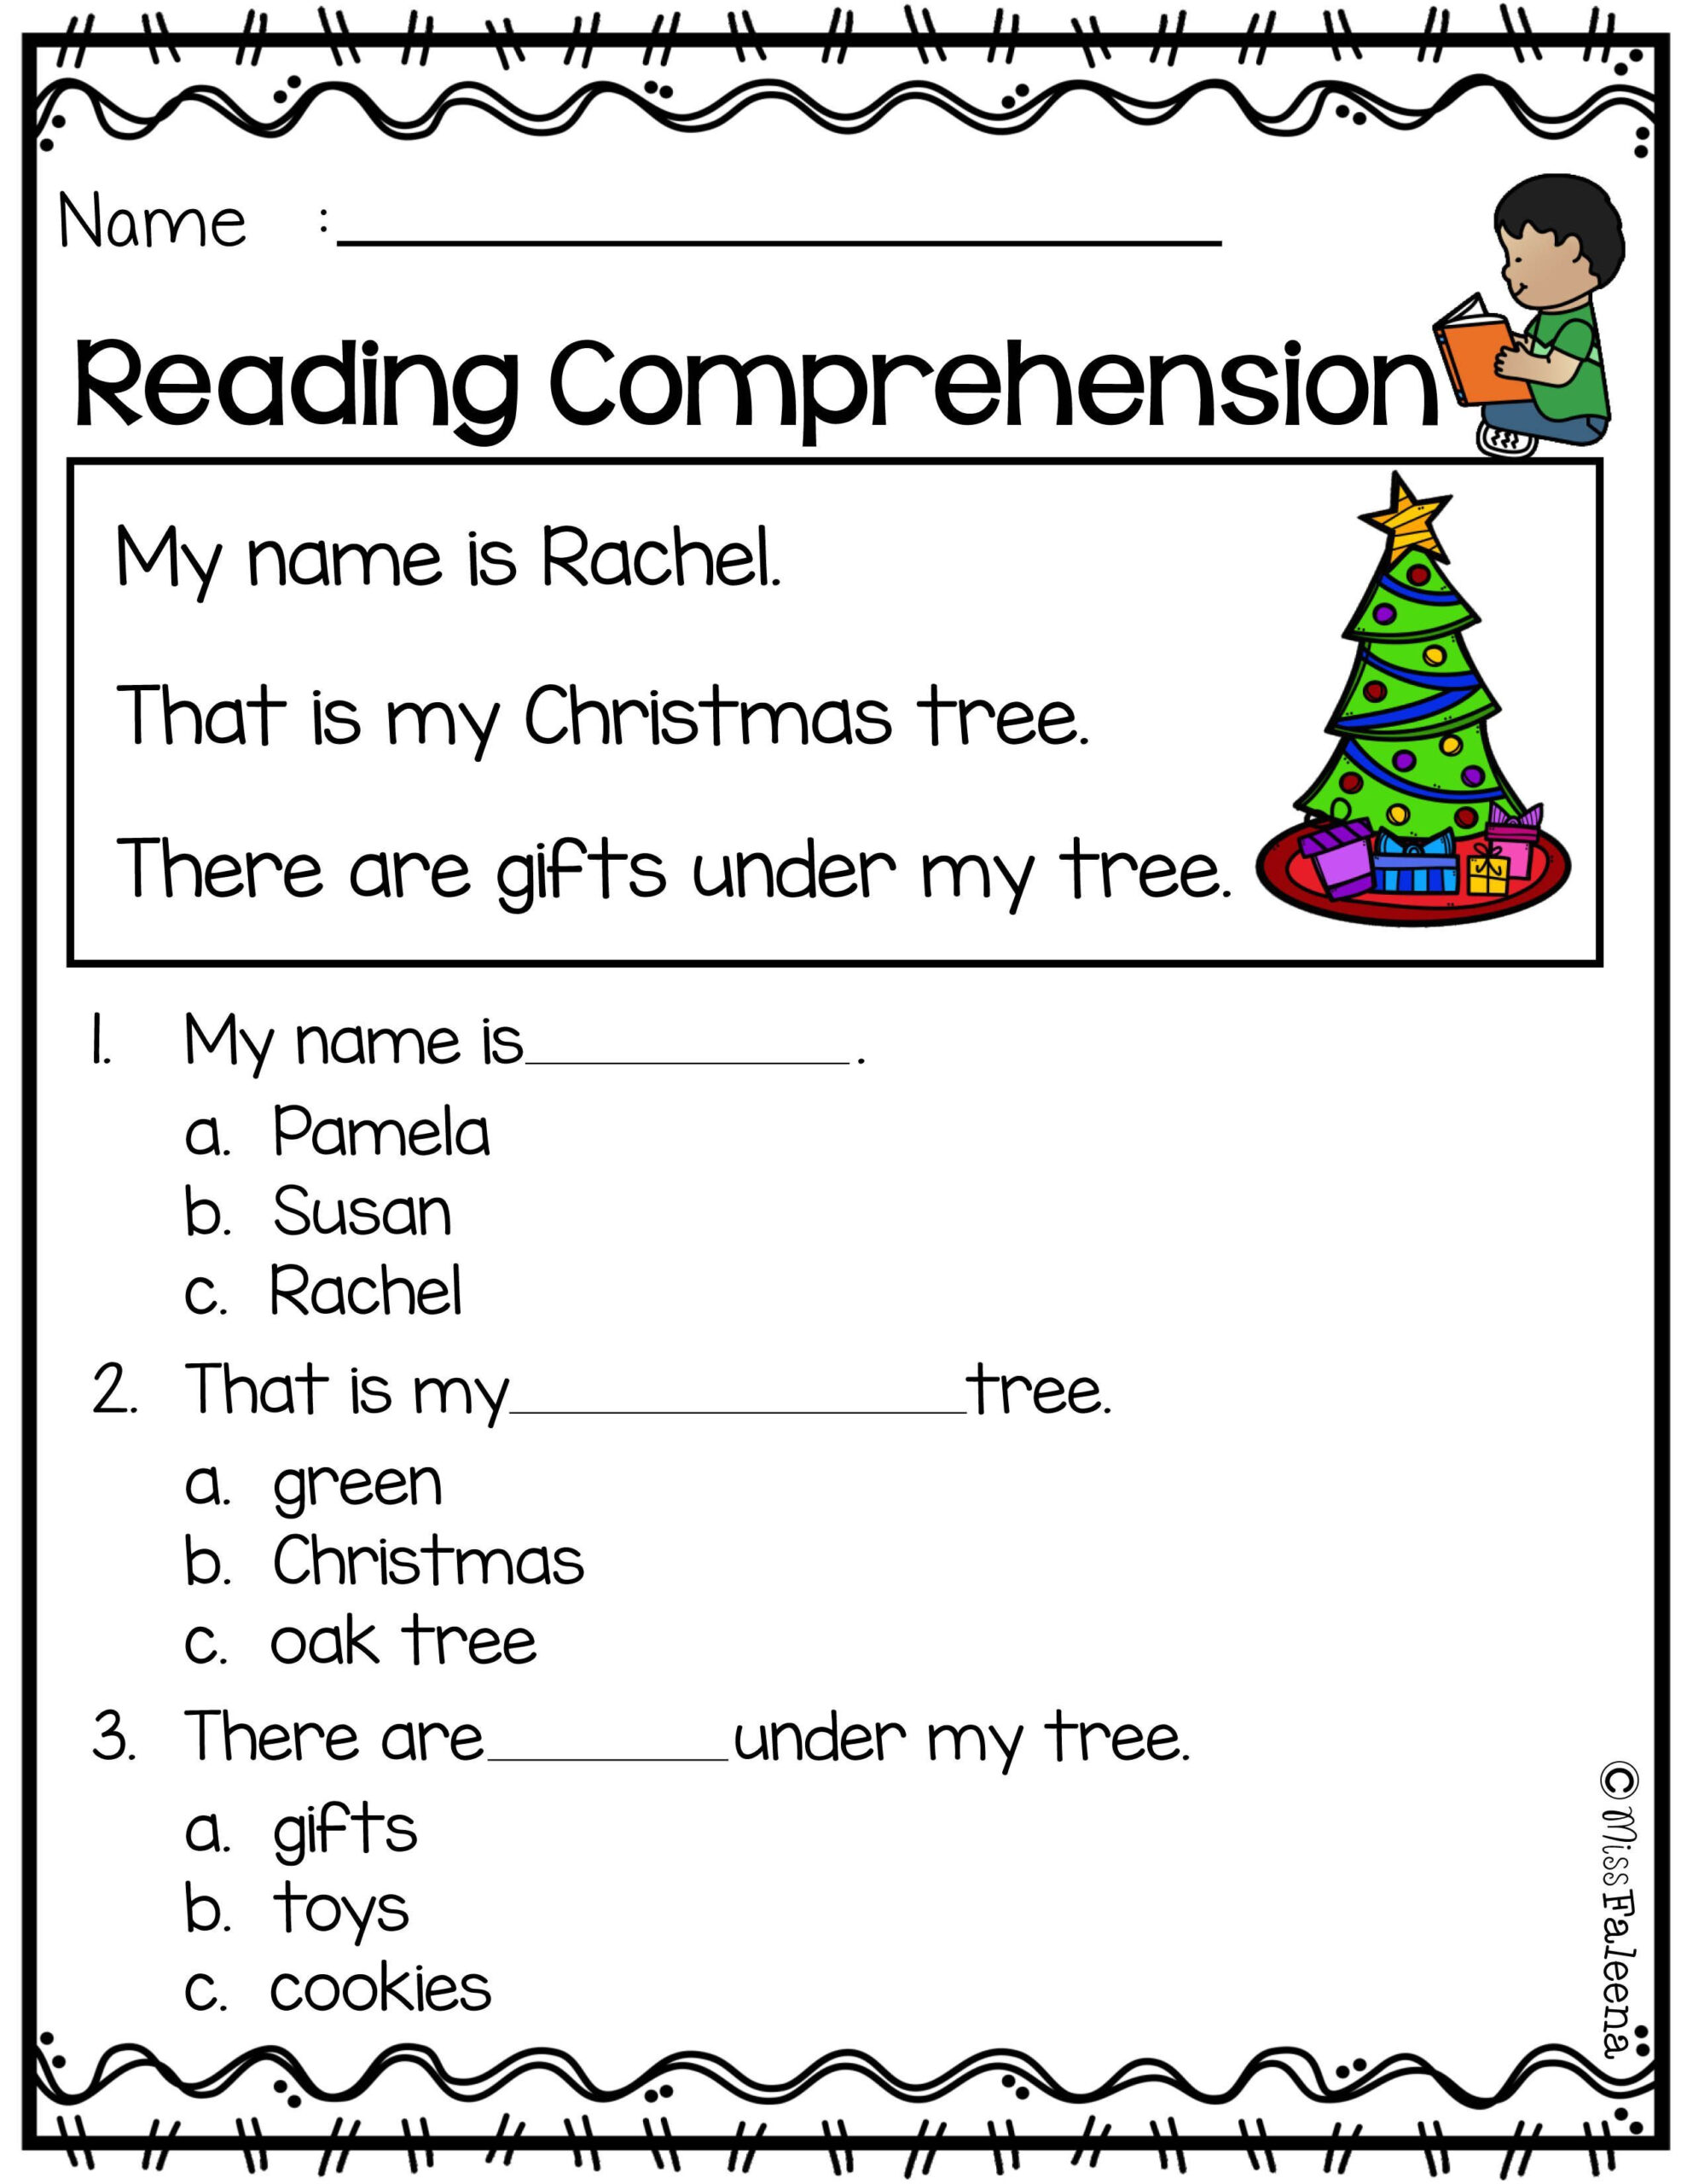 Free Printable Reading Worksheets For 1st And 2nd Grade